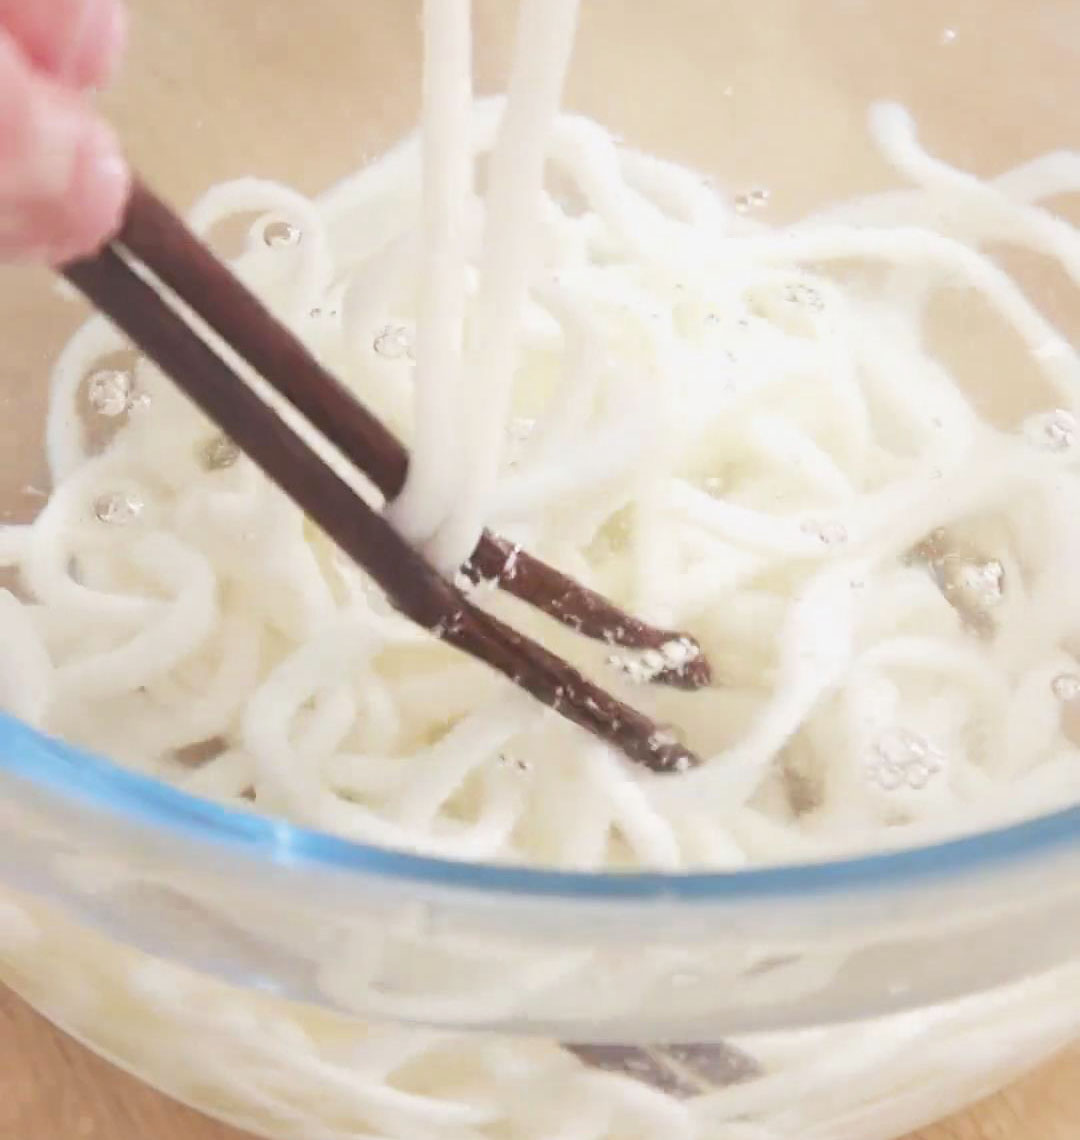 let the udon noodles cool in cold water